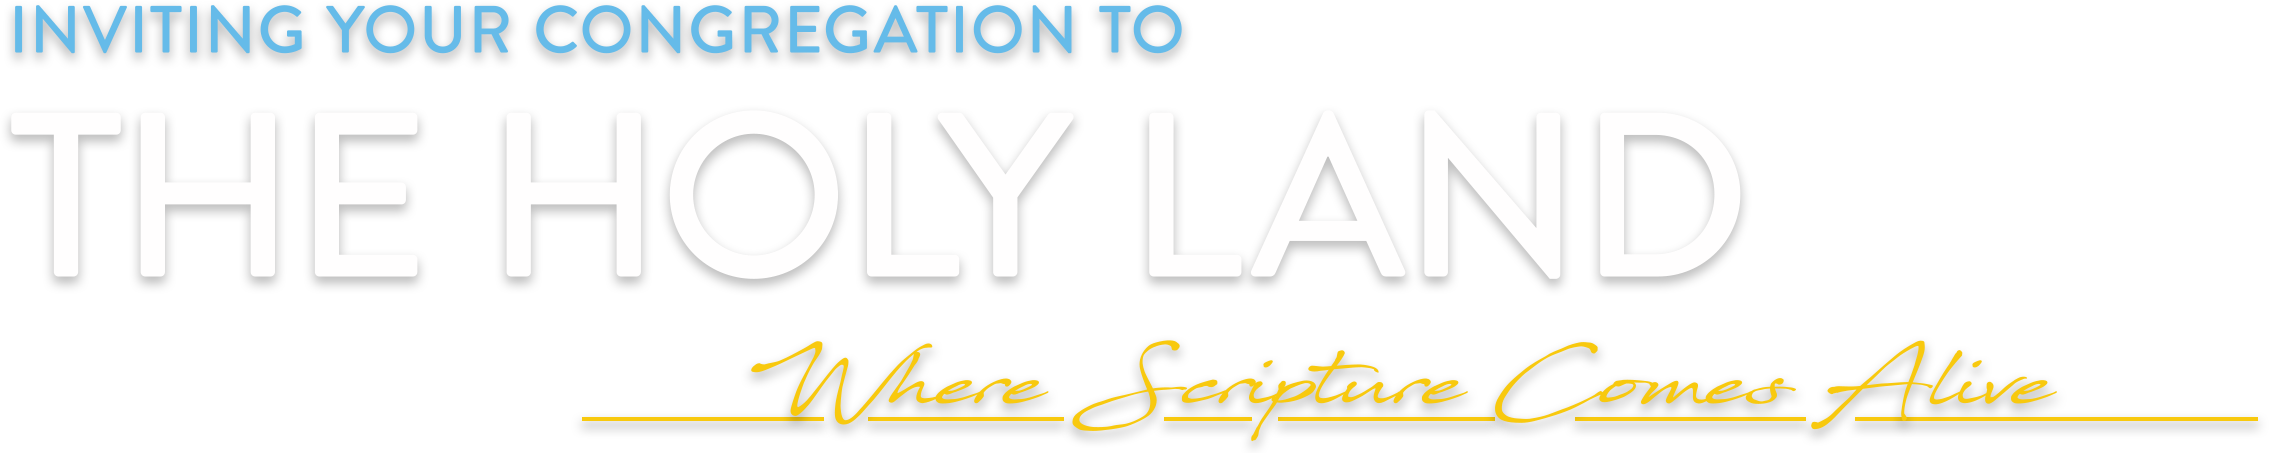 Inviting your Congregation to The Holy Land Where Scripture Comes Alive